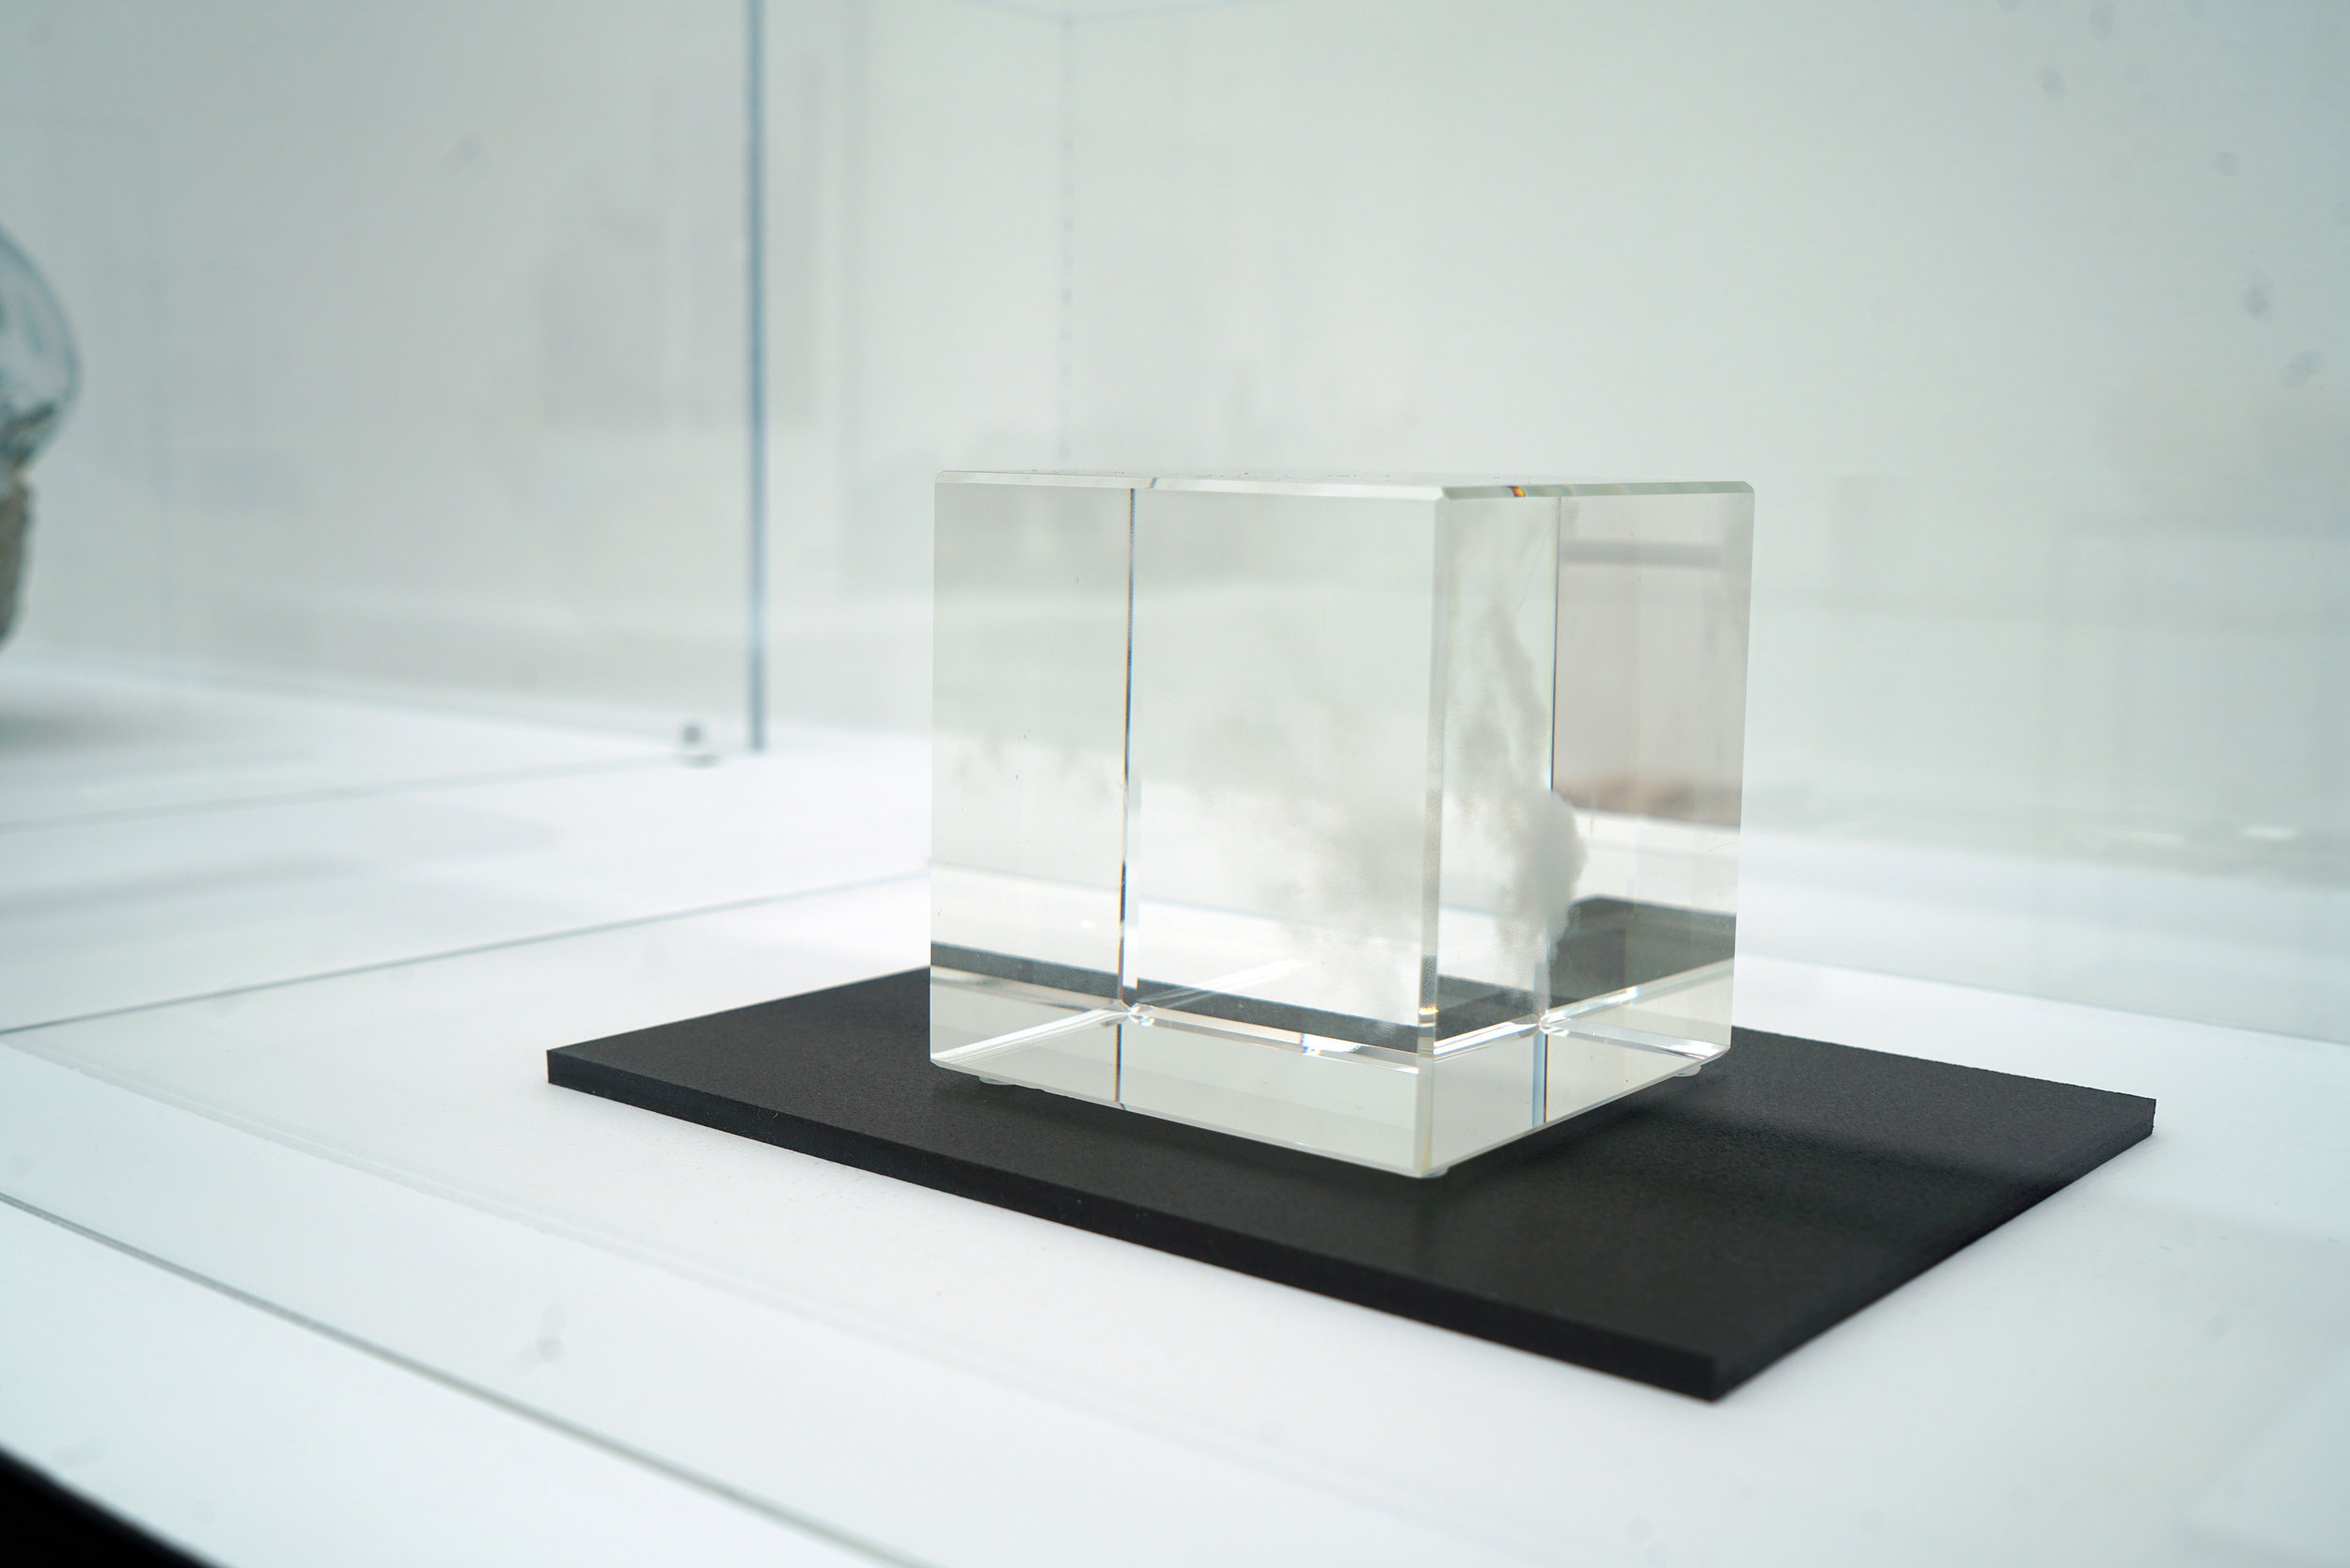  “NEW GLASS NOW 2019,” CORNING MUSEUM OF GLASS, NY 2019 